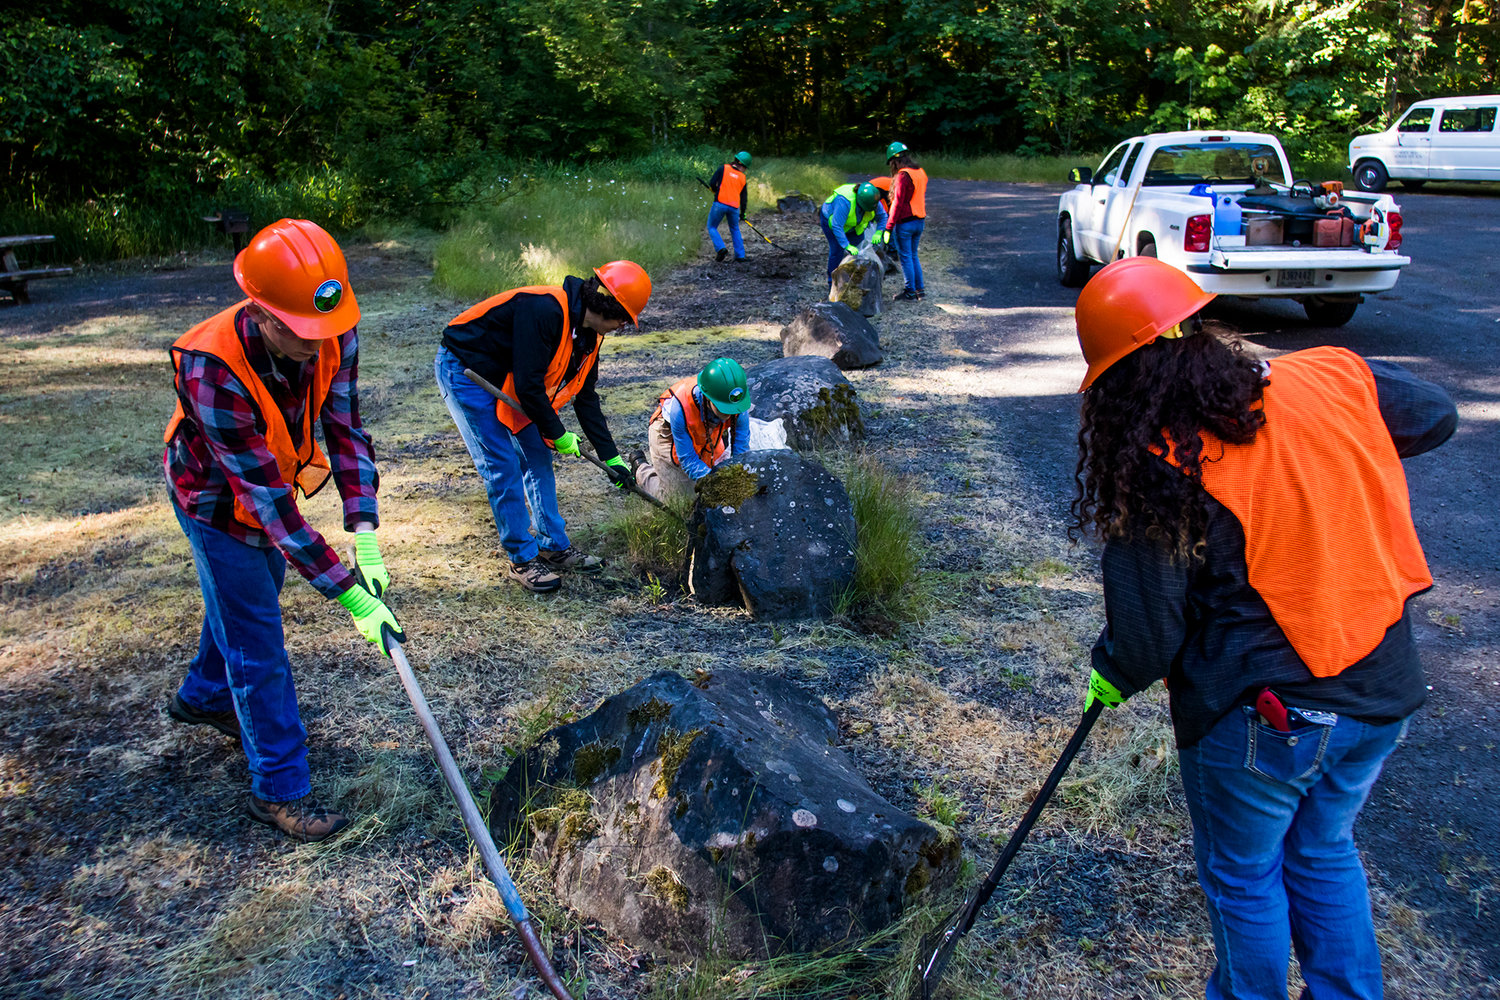 Members of the Discovery Team clean up debris and natural material surrounding rocks and park benches at the Woods Creek Trailhead Wednesday afternoon in the Gifford Pinchot National Forest.